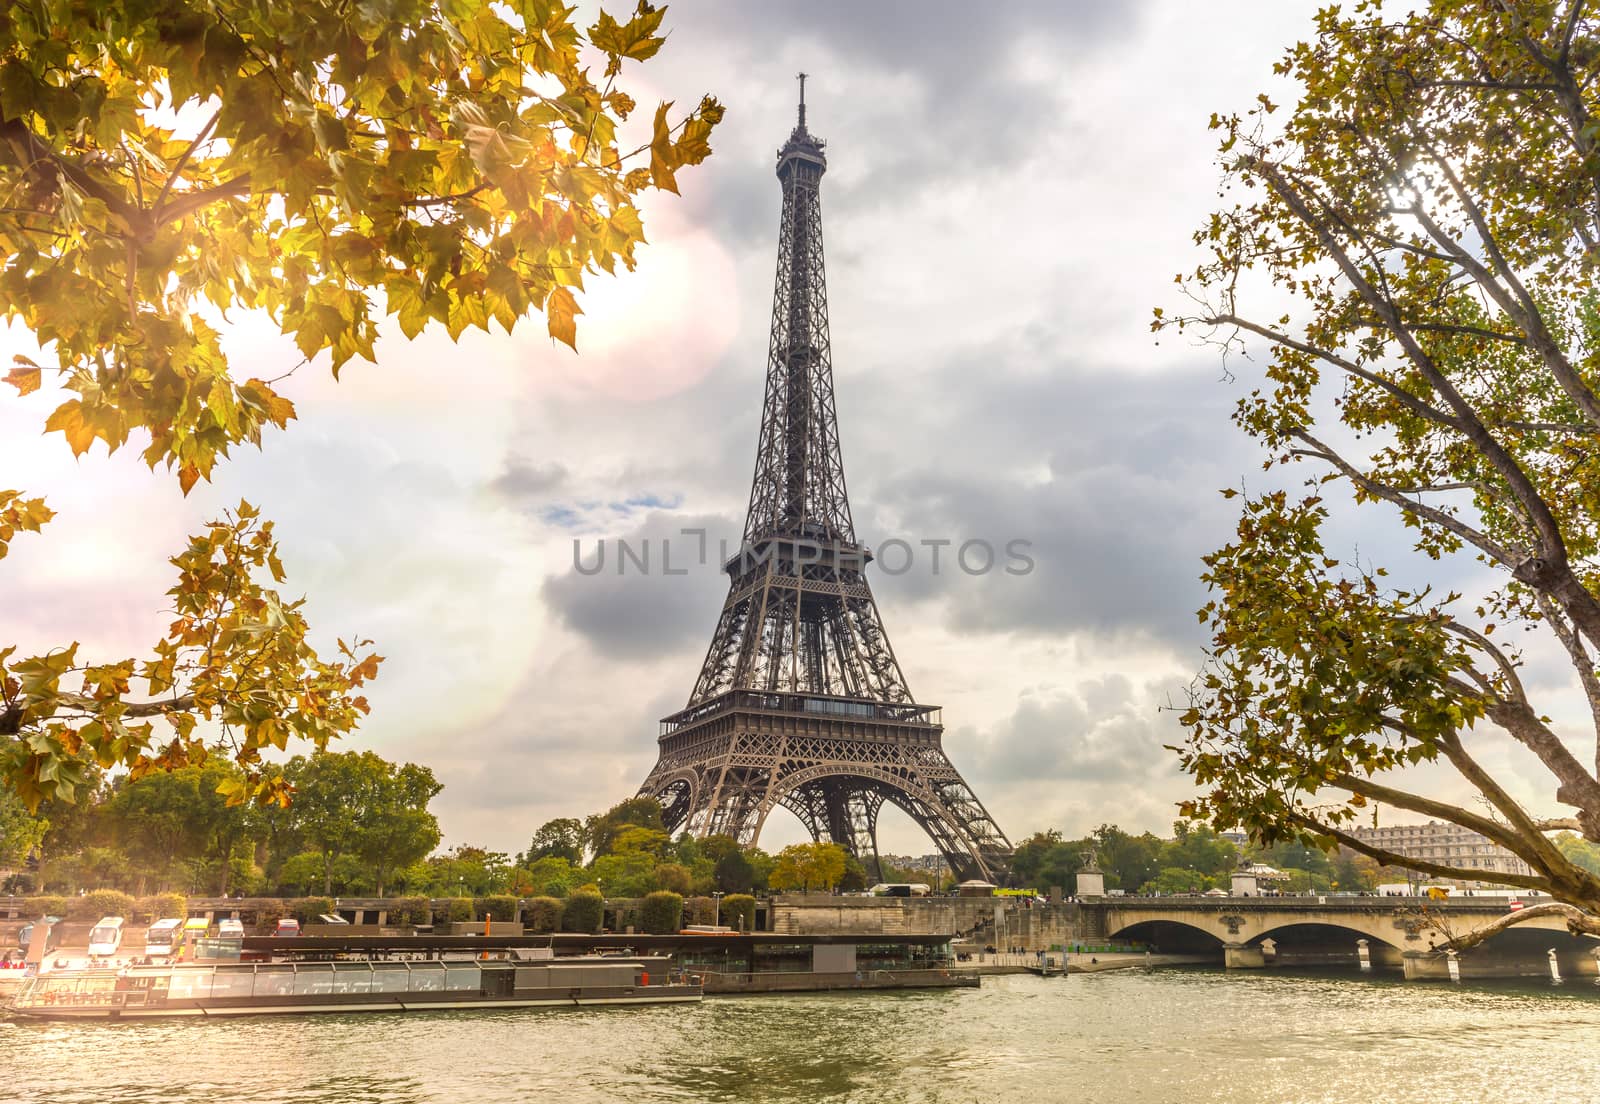 The Eiffel Tower on the banks of the Seine in autumn in Paris, France by Frederic